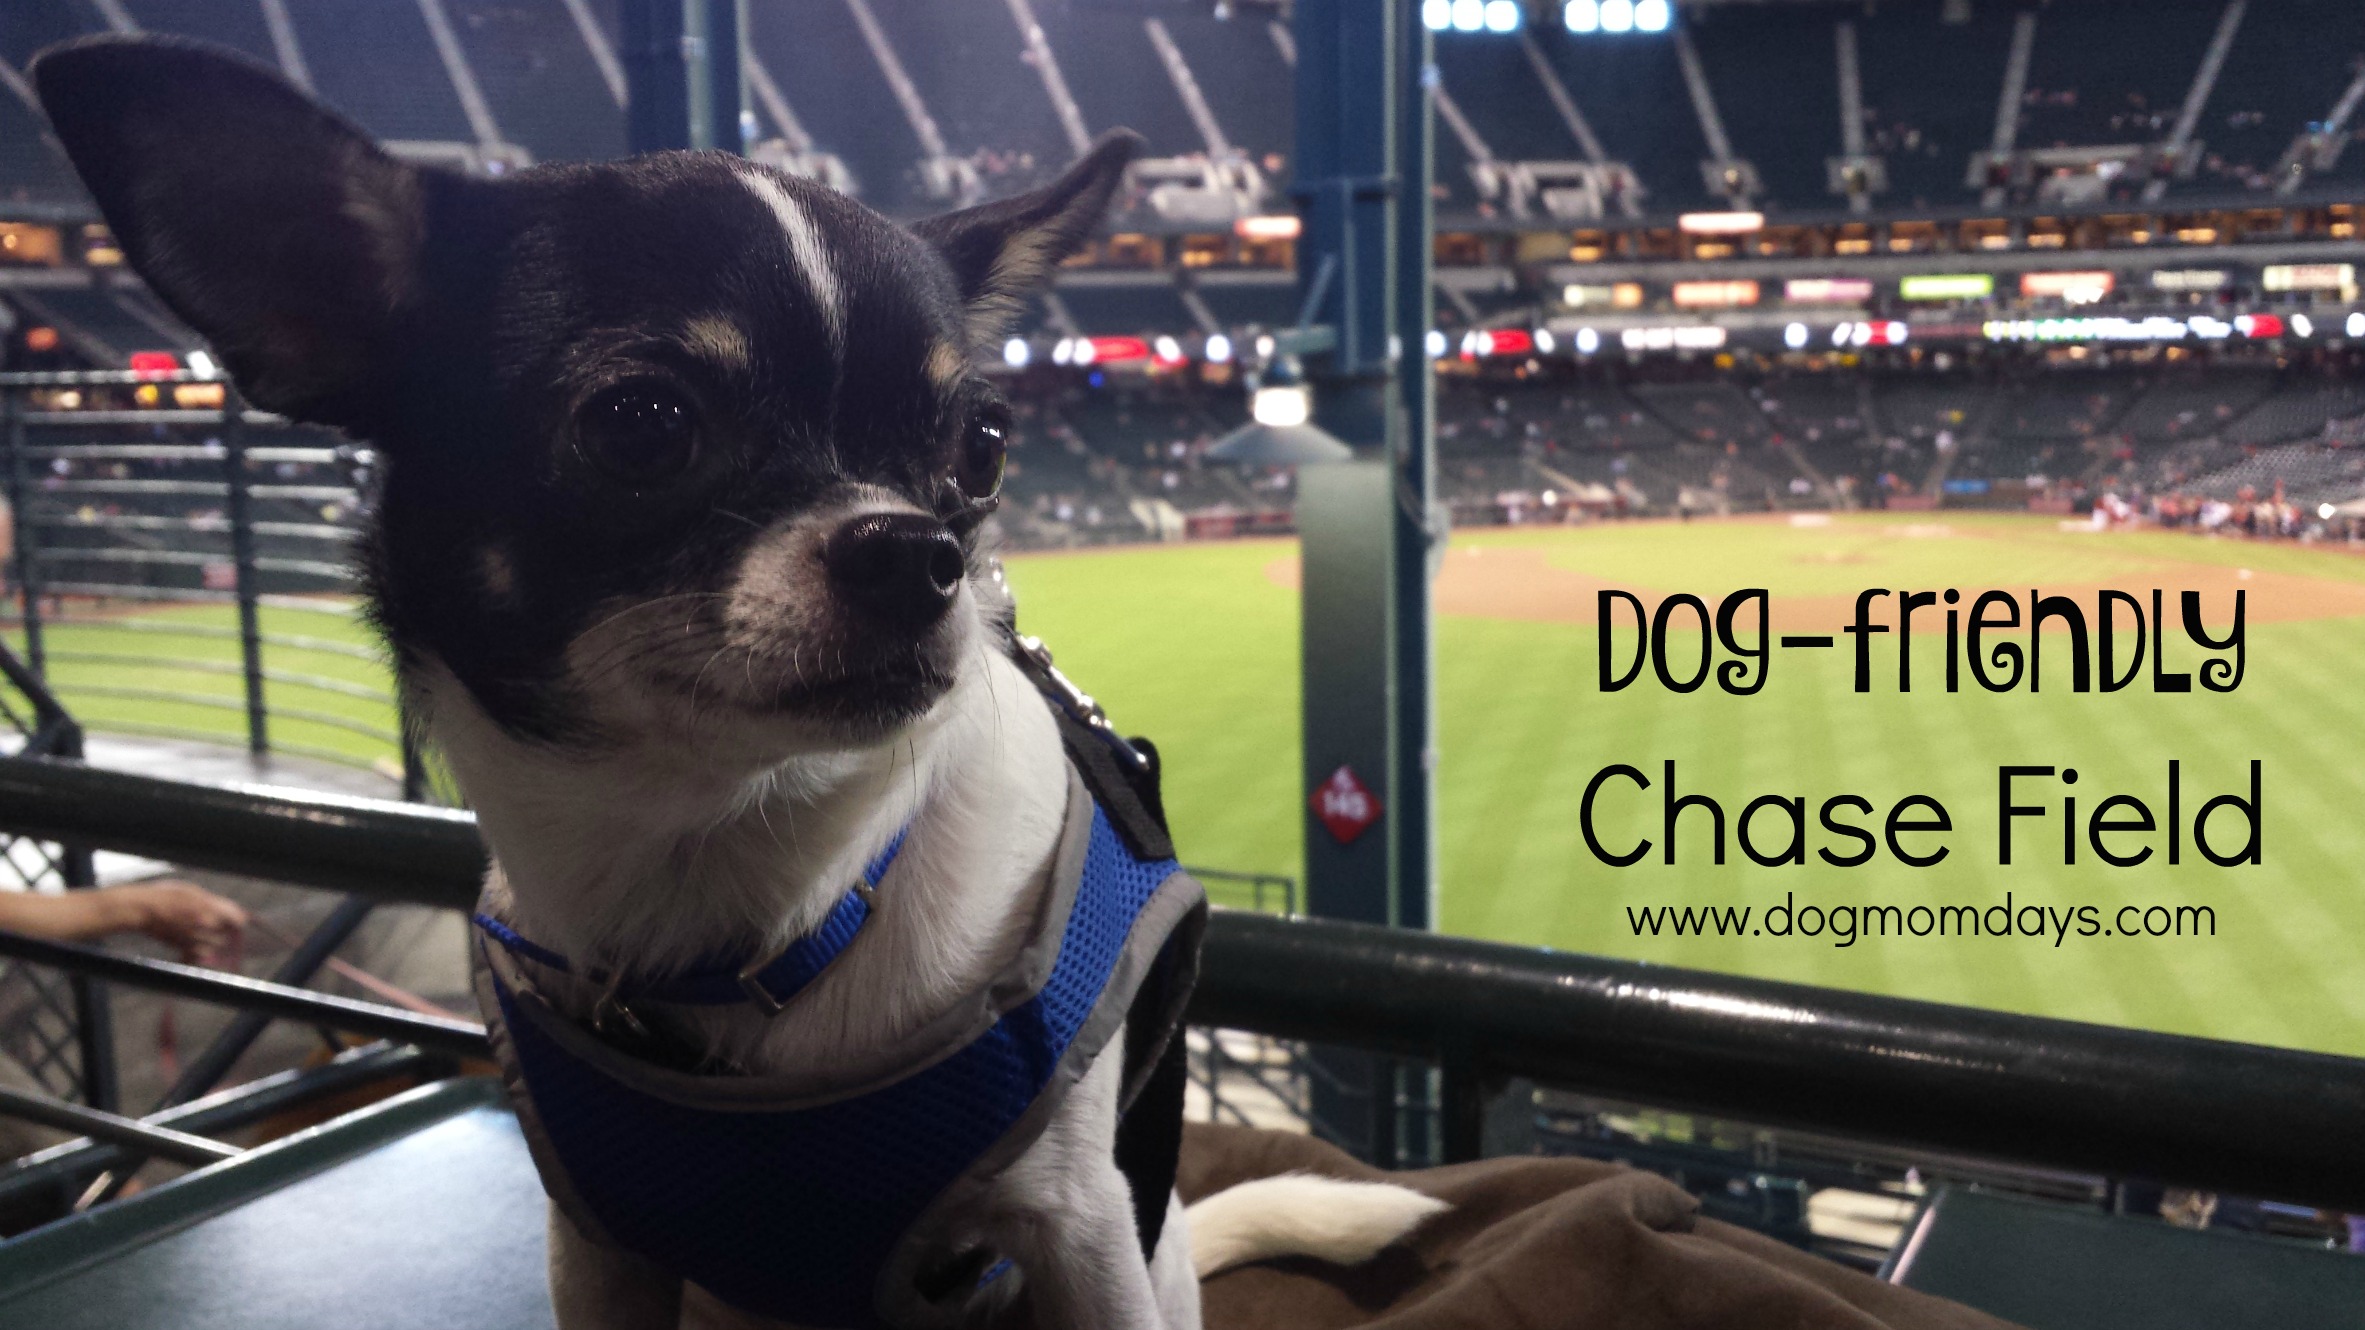 Dog-friendly Chase Field